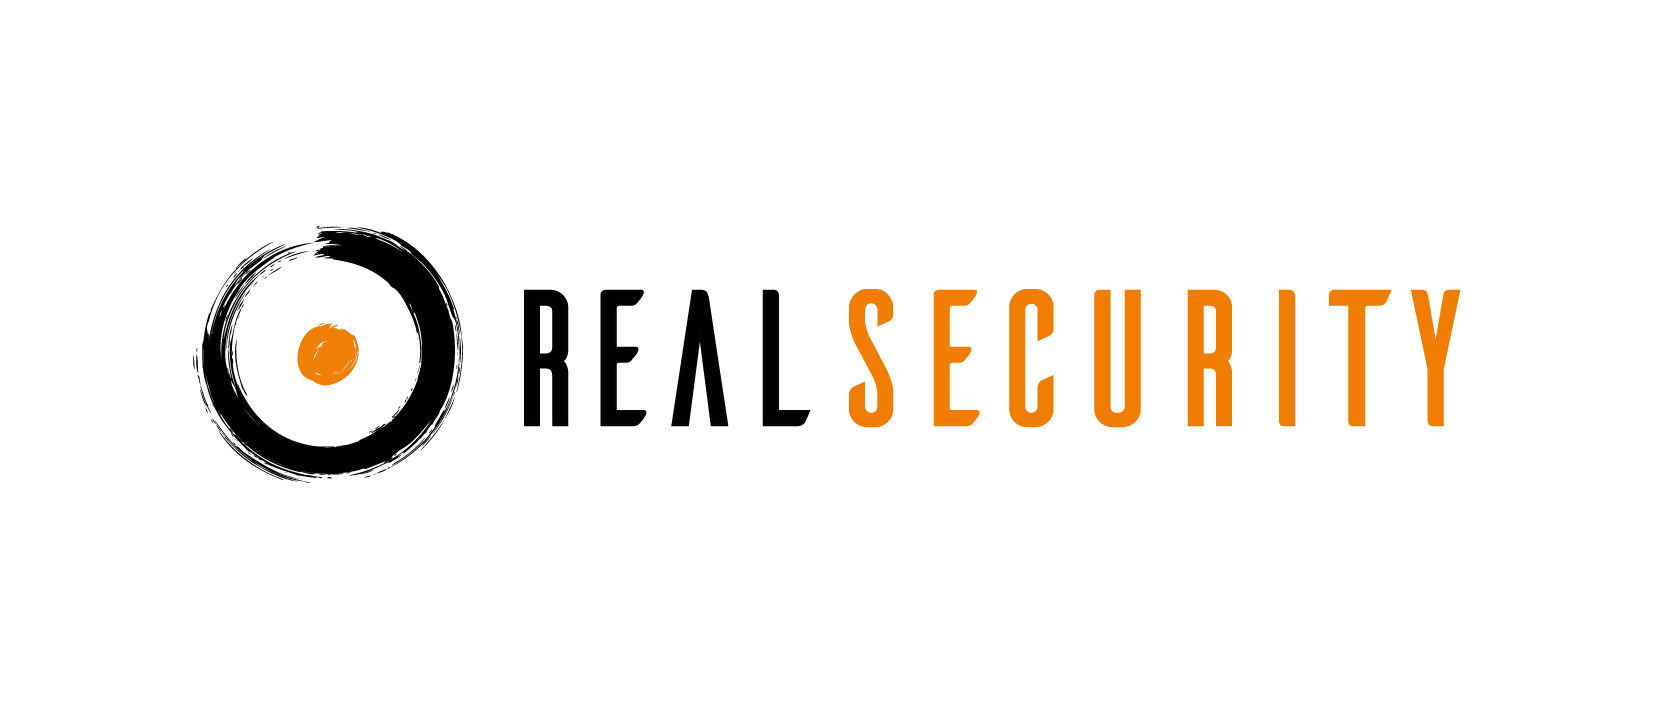 Real-security-2016-logo-final-circle-with-slogan-only-cruves-small-01